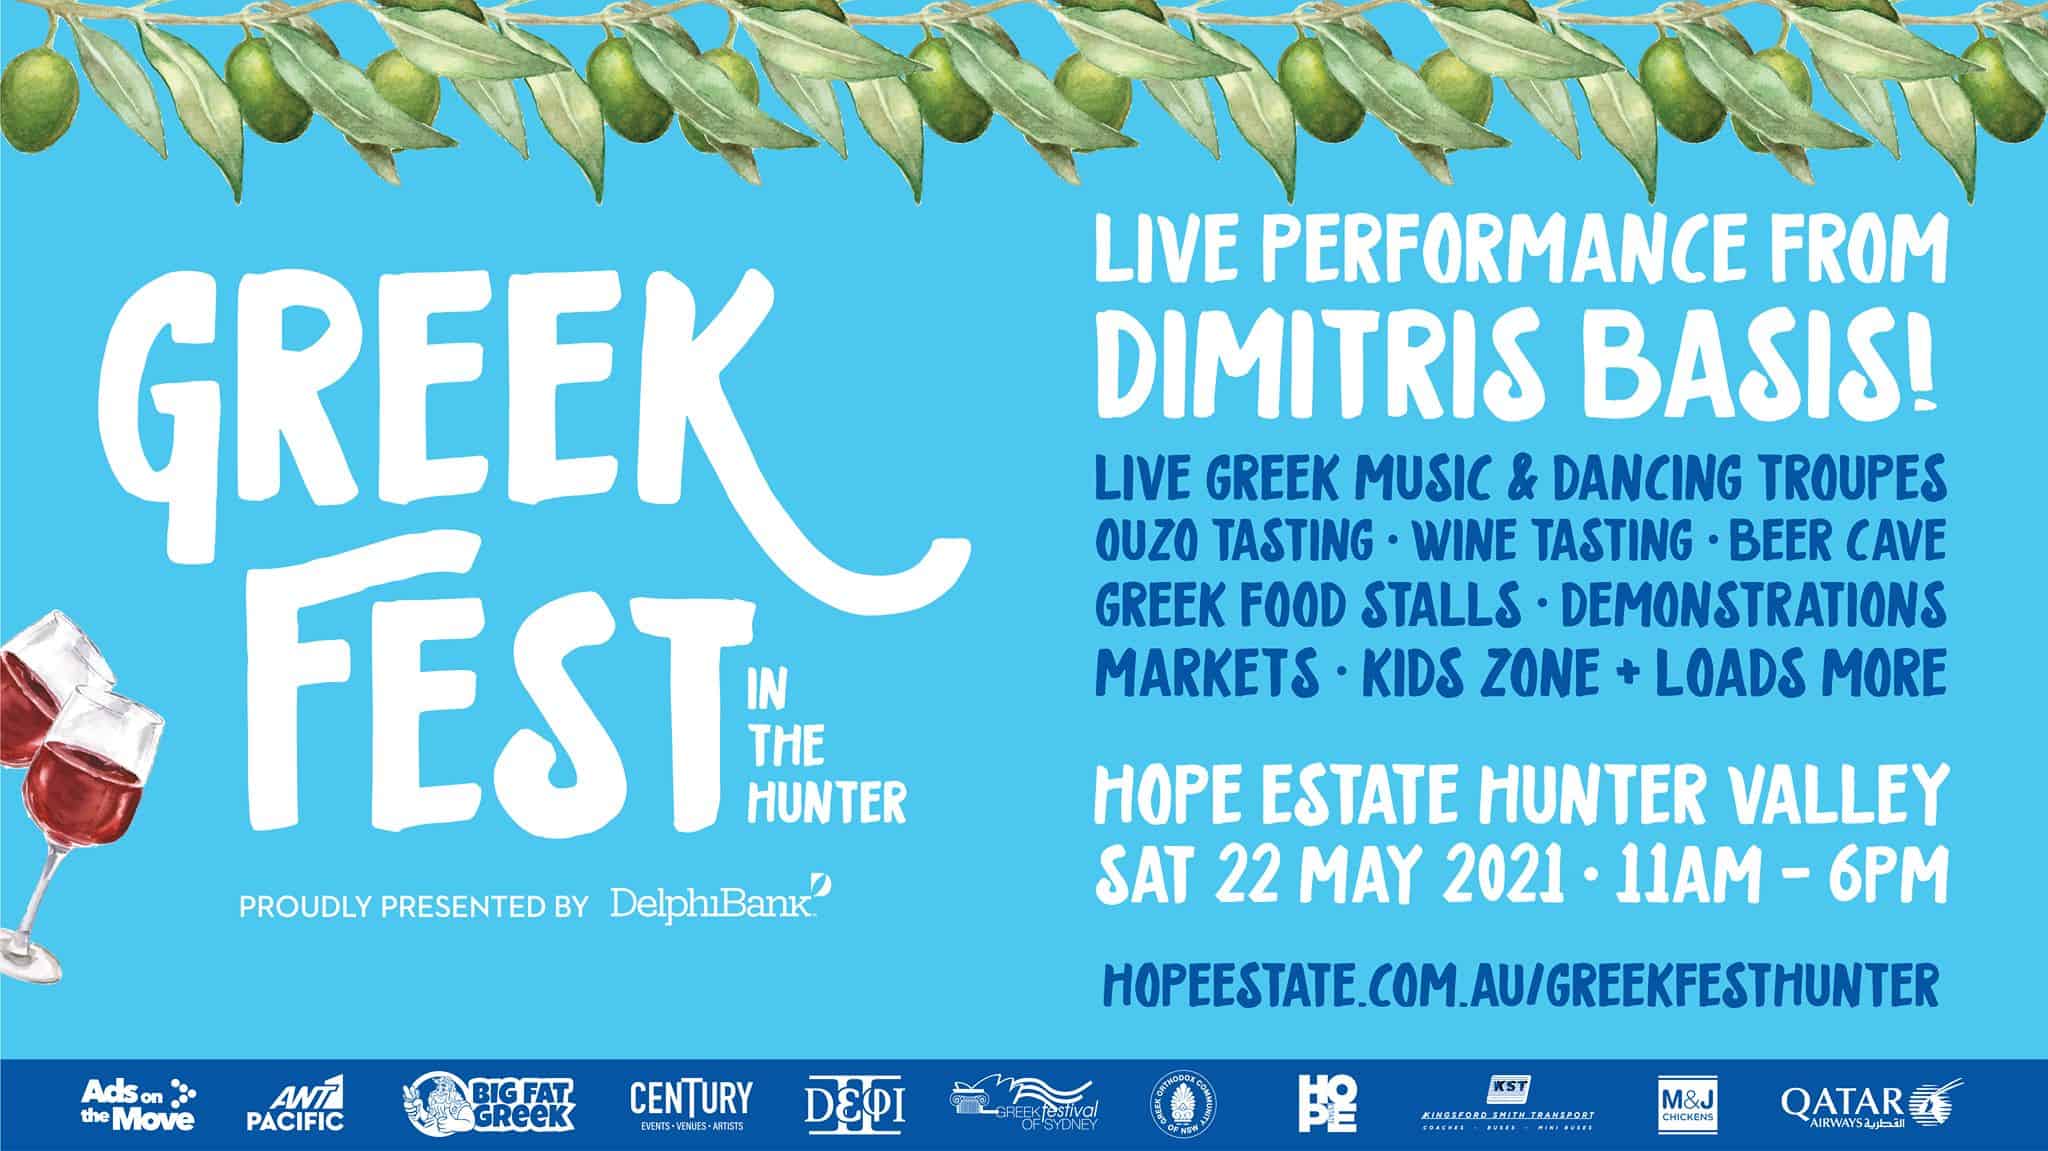 Enjoy The Greek Festival Of Sydney At The Hunter Valley This Saturday